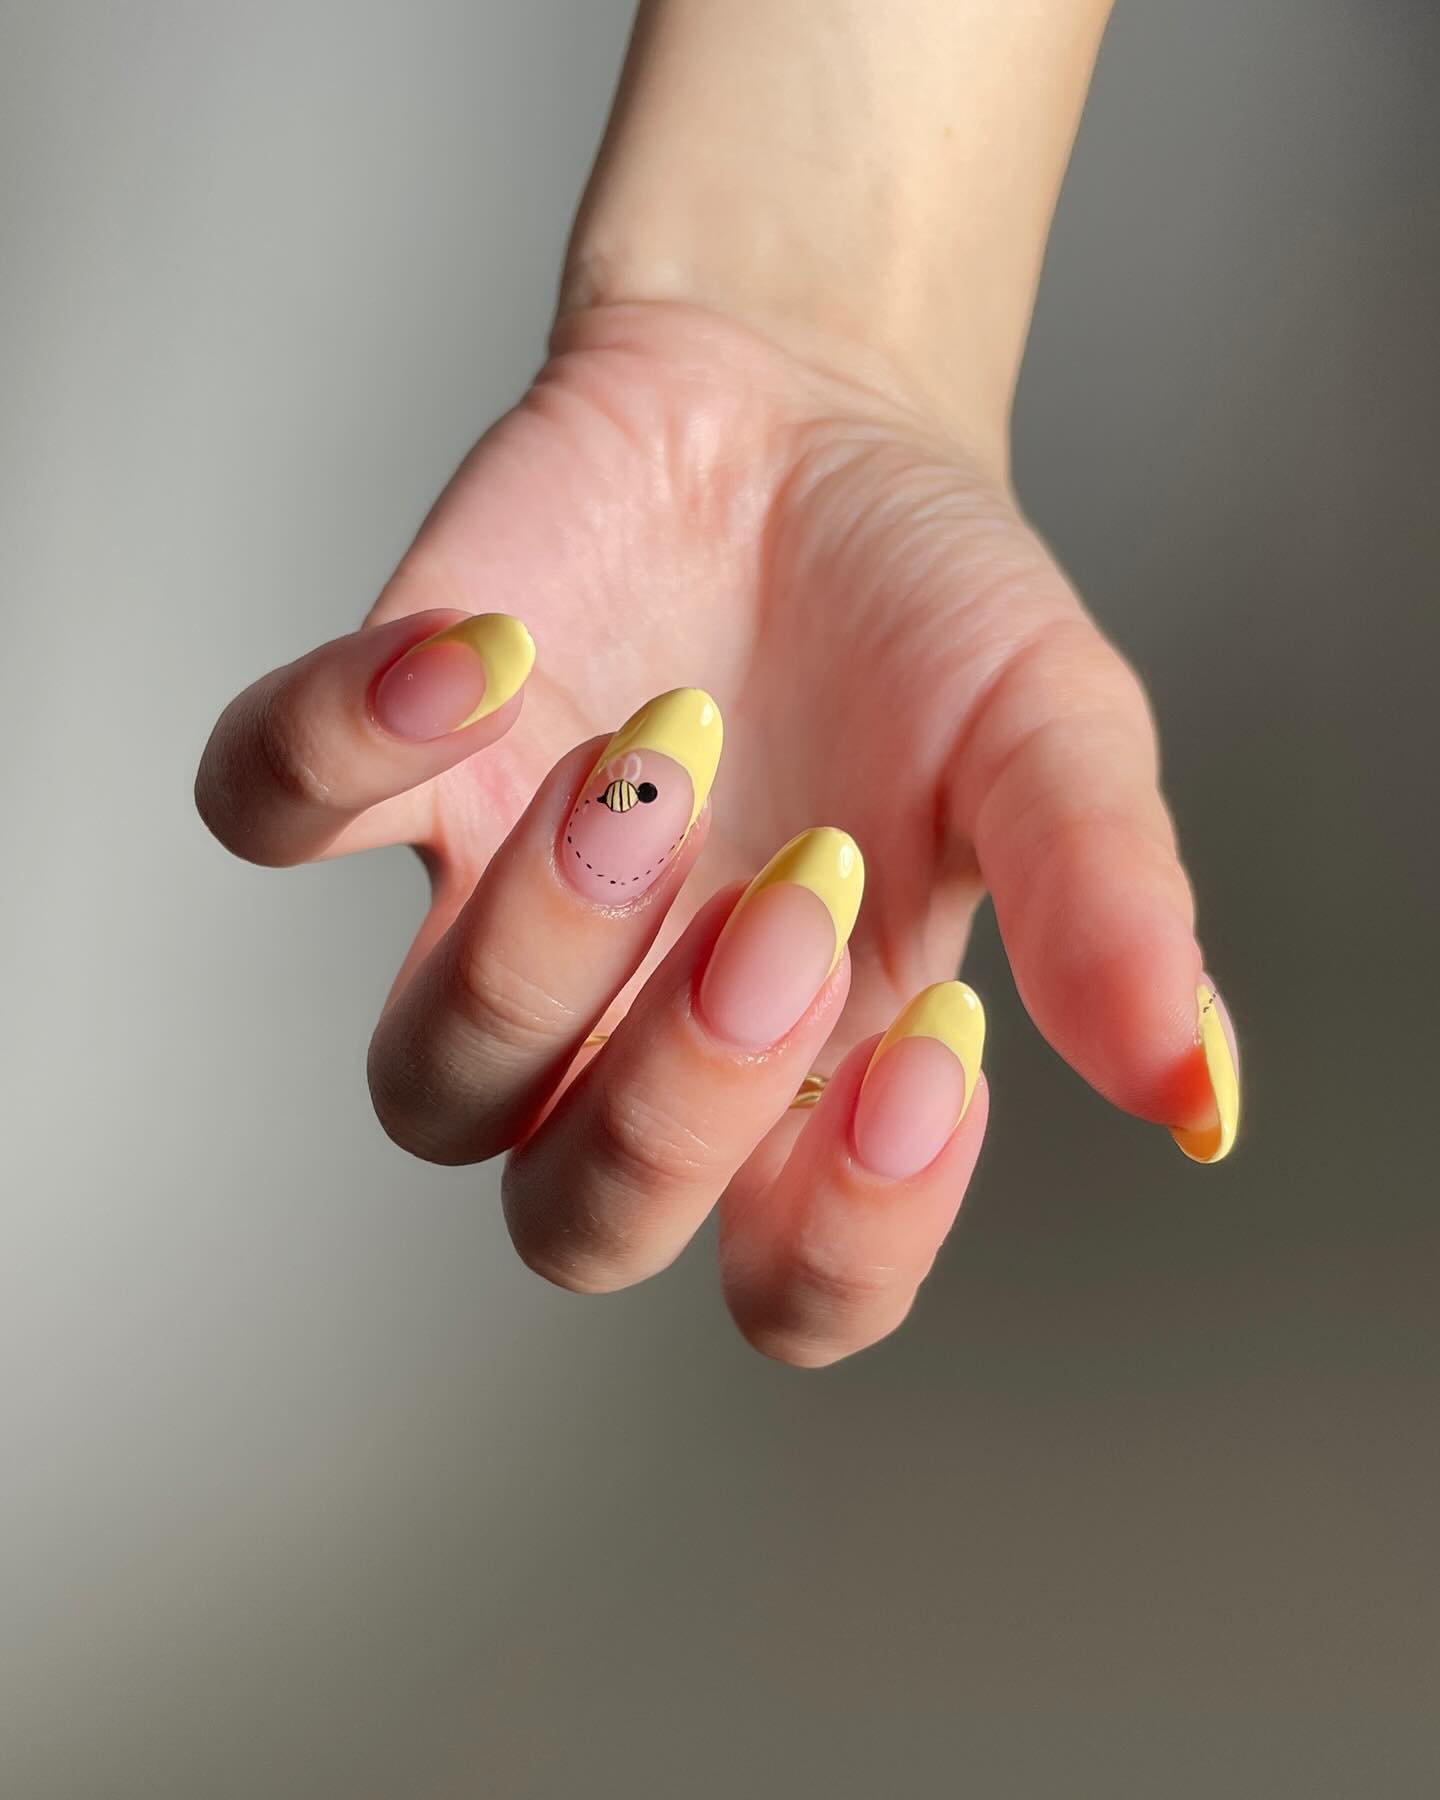 100 Pretty Spring Nail Designs To Try This Year images 91